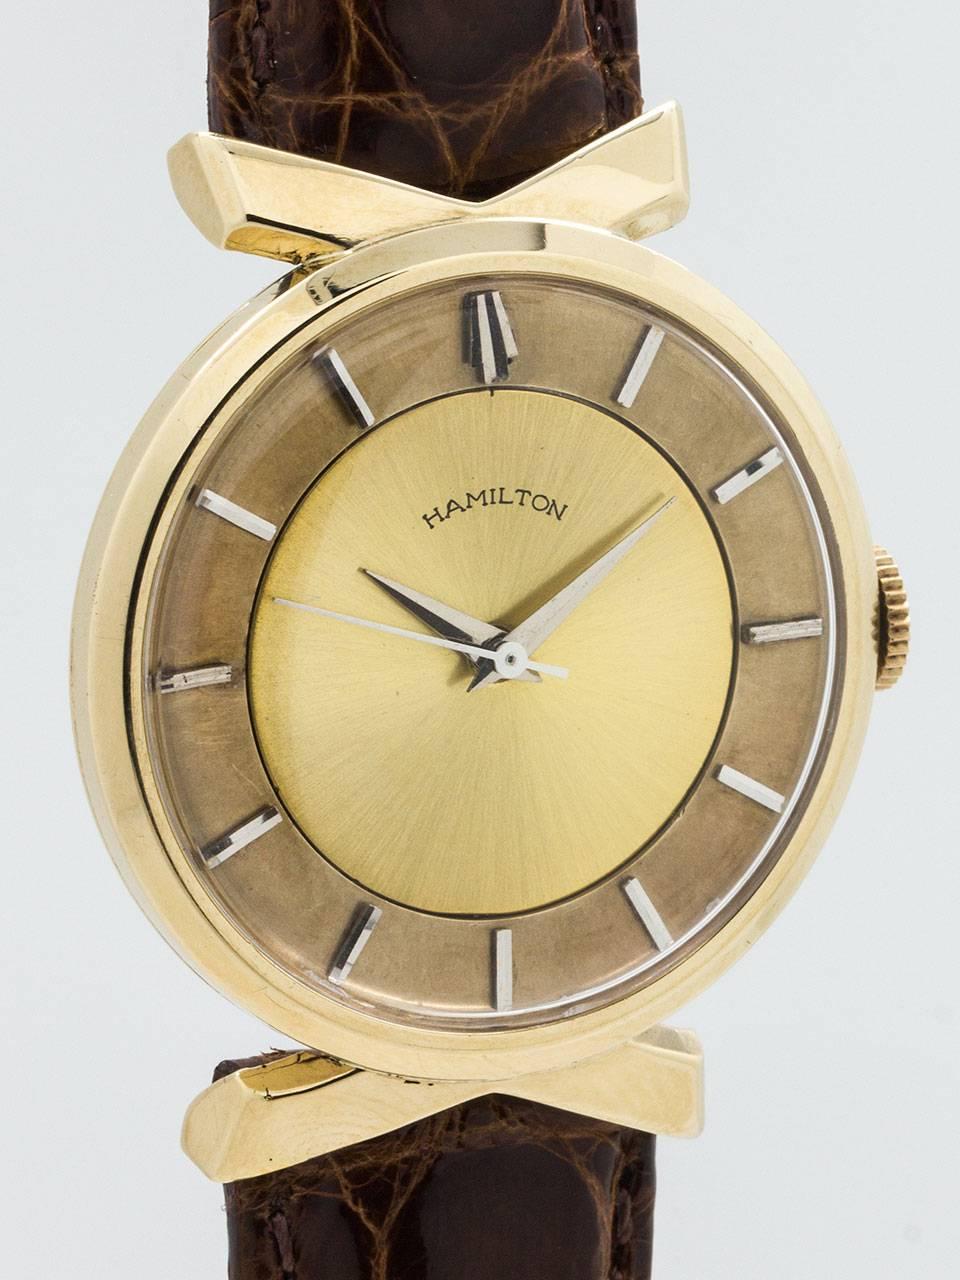 Hamilton 14K Yellow Gold “Golden Tempus” man’s vintage dress model circa 1957. Featuring a distinctive modernist case design 33.2 x 40.9 case with overlapping “fin” shaped lugs. Original 2 tone champagne dial with applied silver indexes and tapered